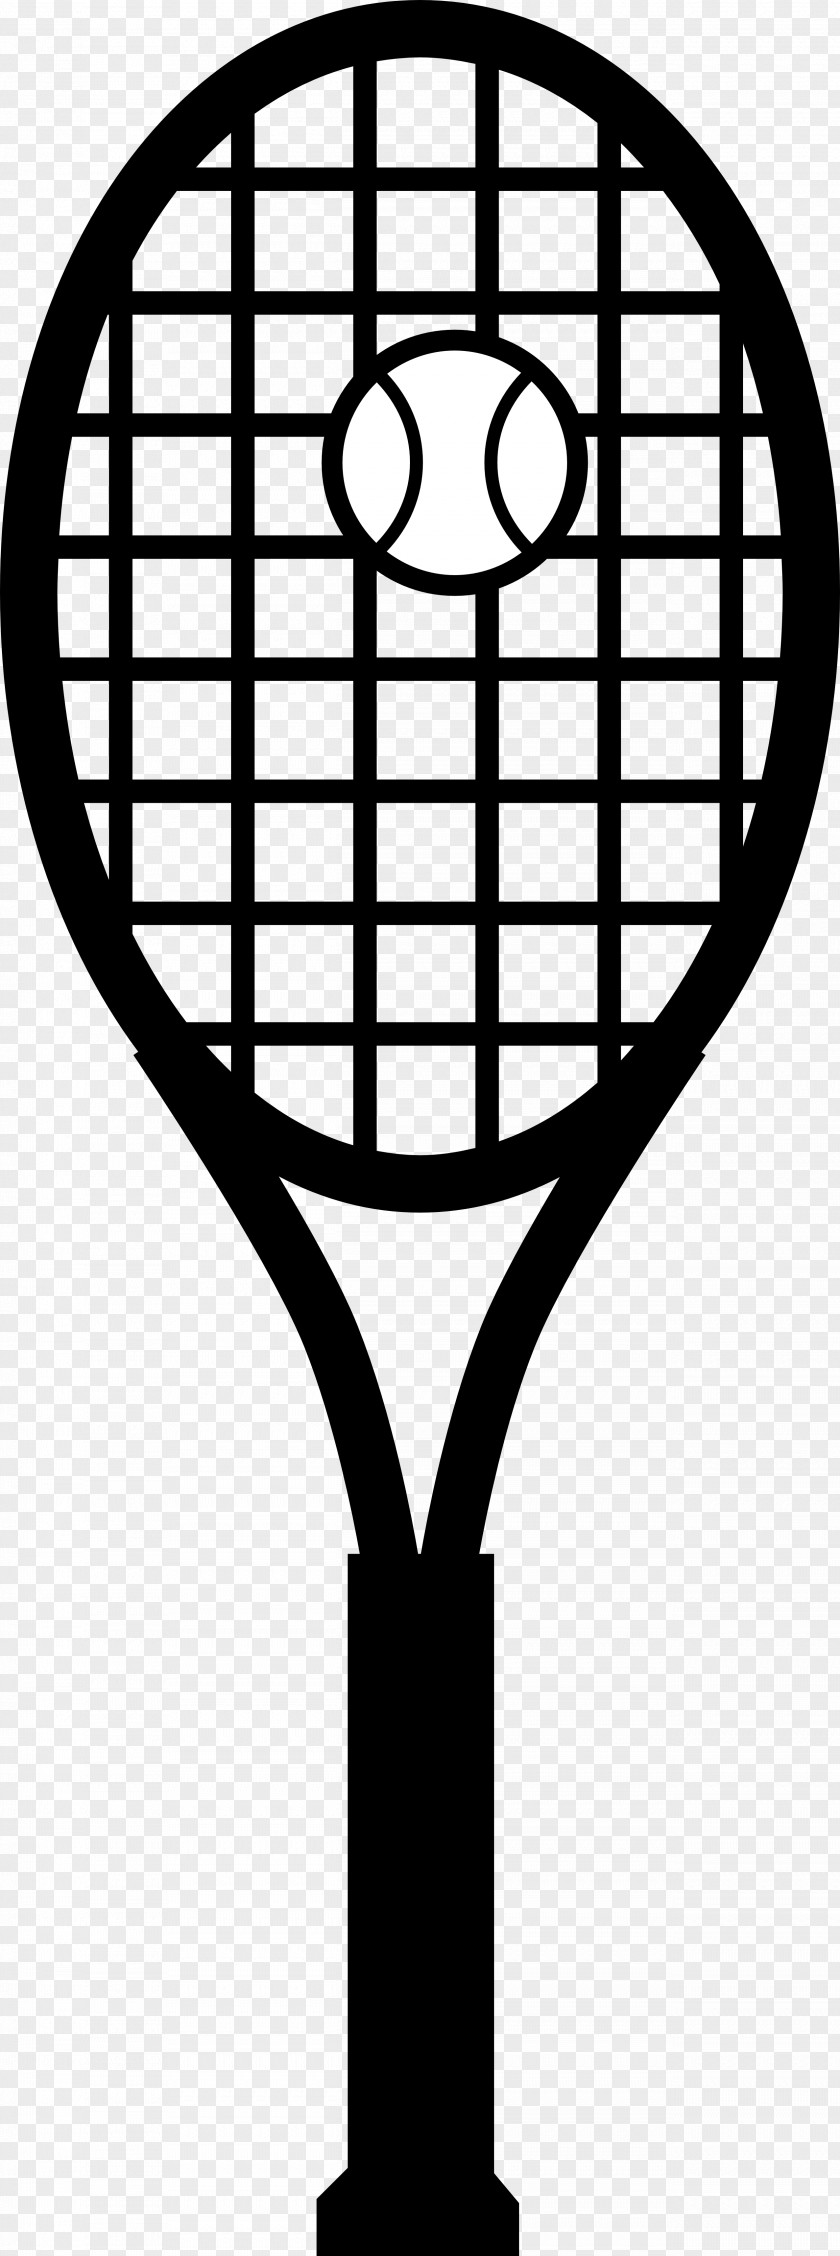 Tennis Racket Picture Ball Clip Art PNG